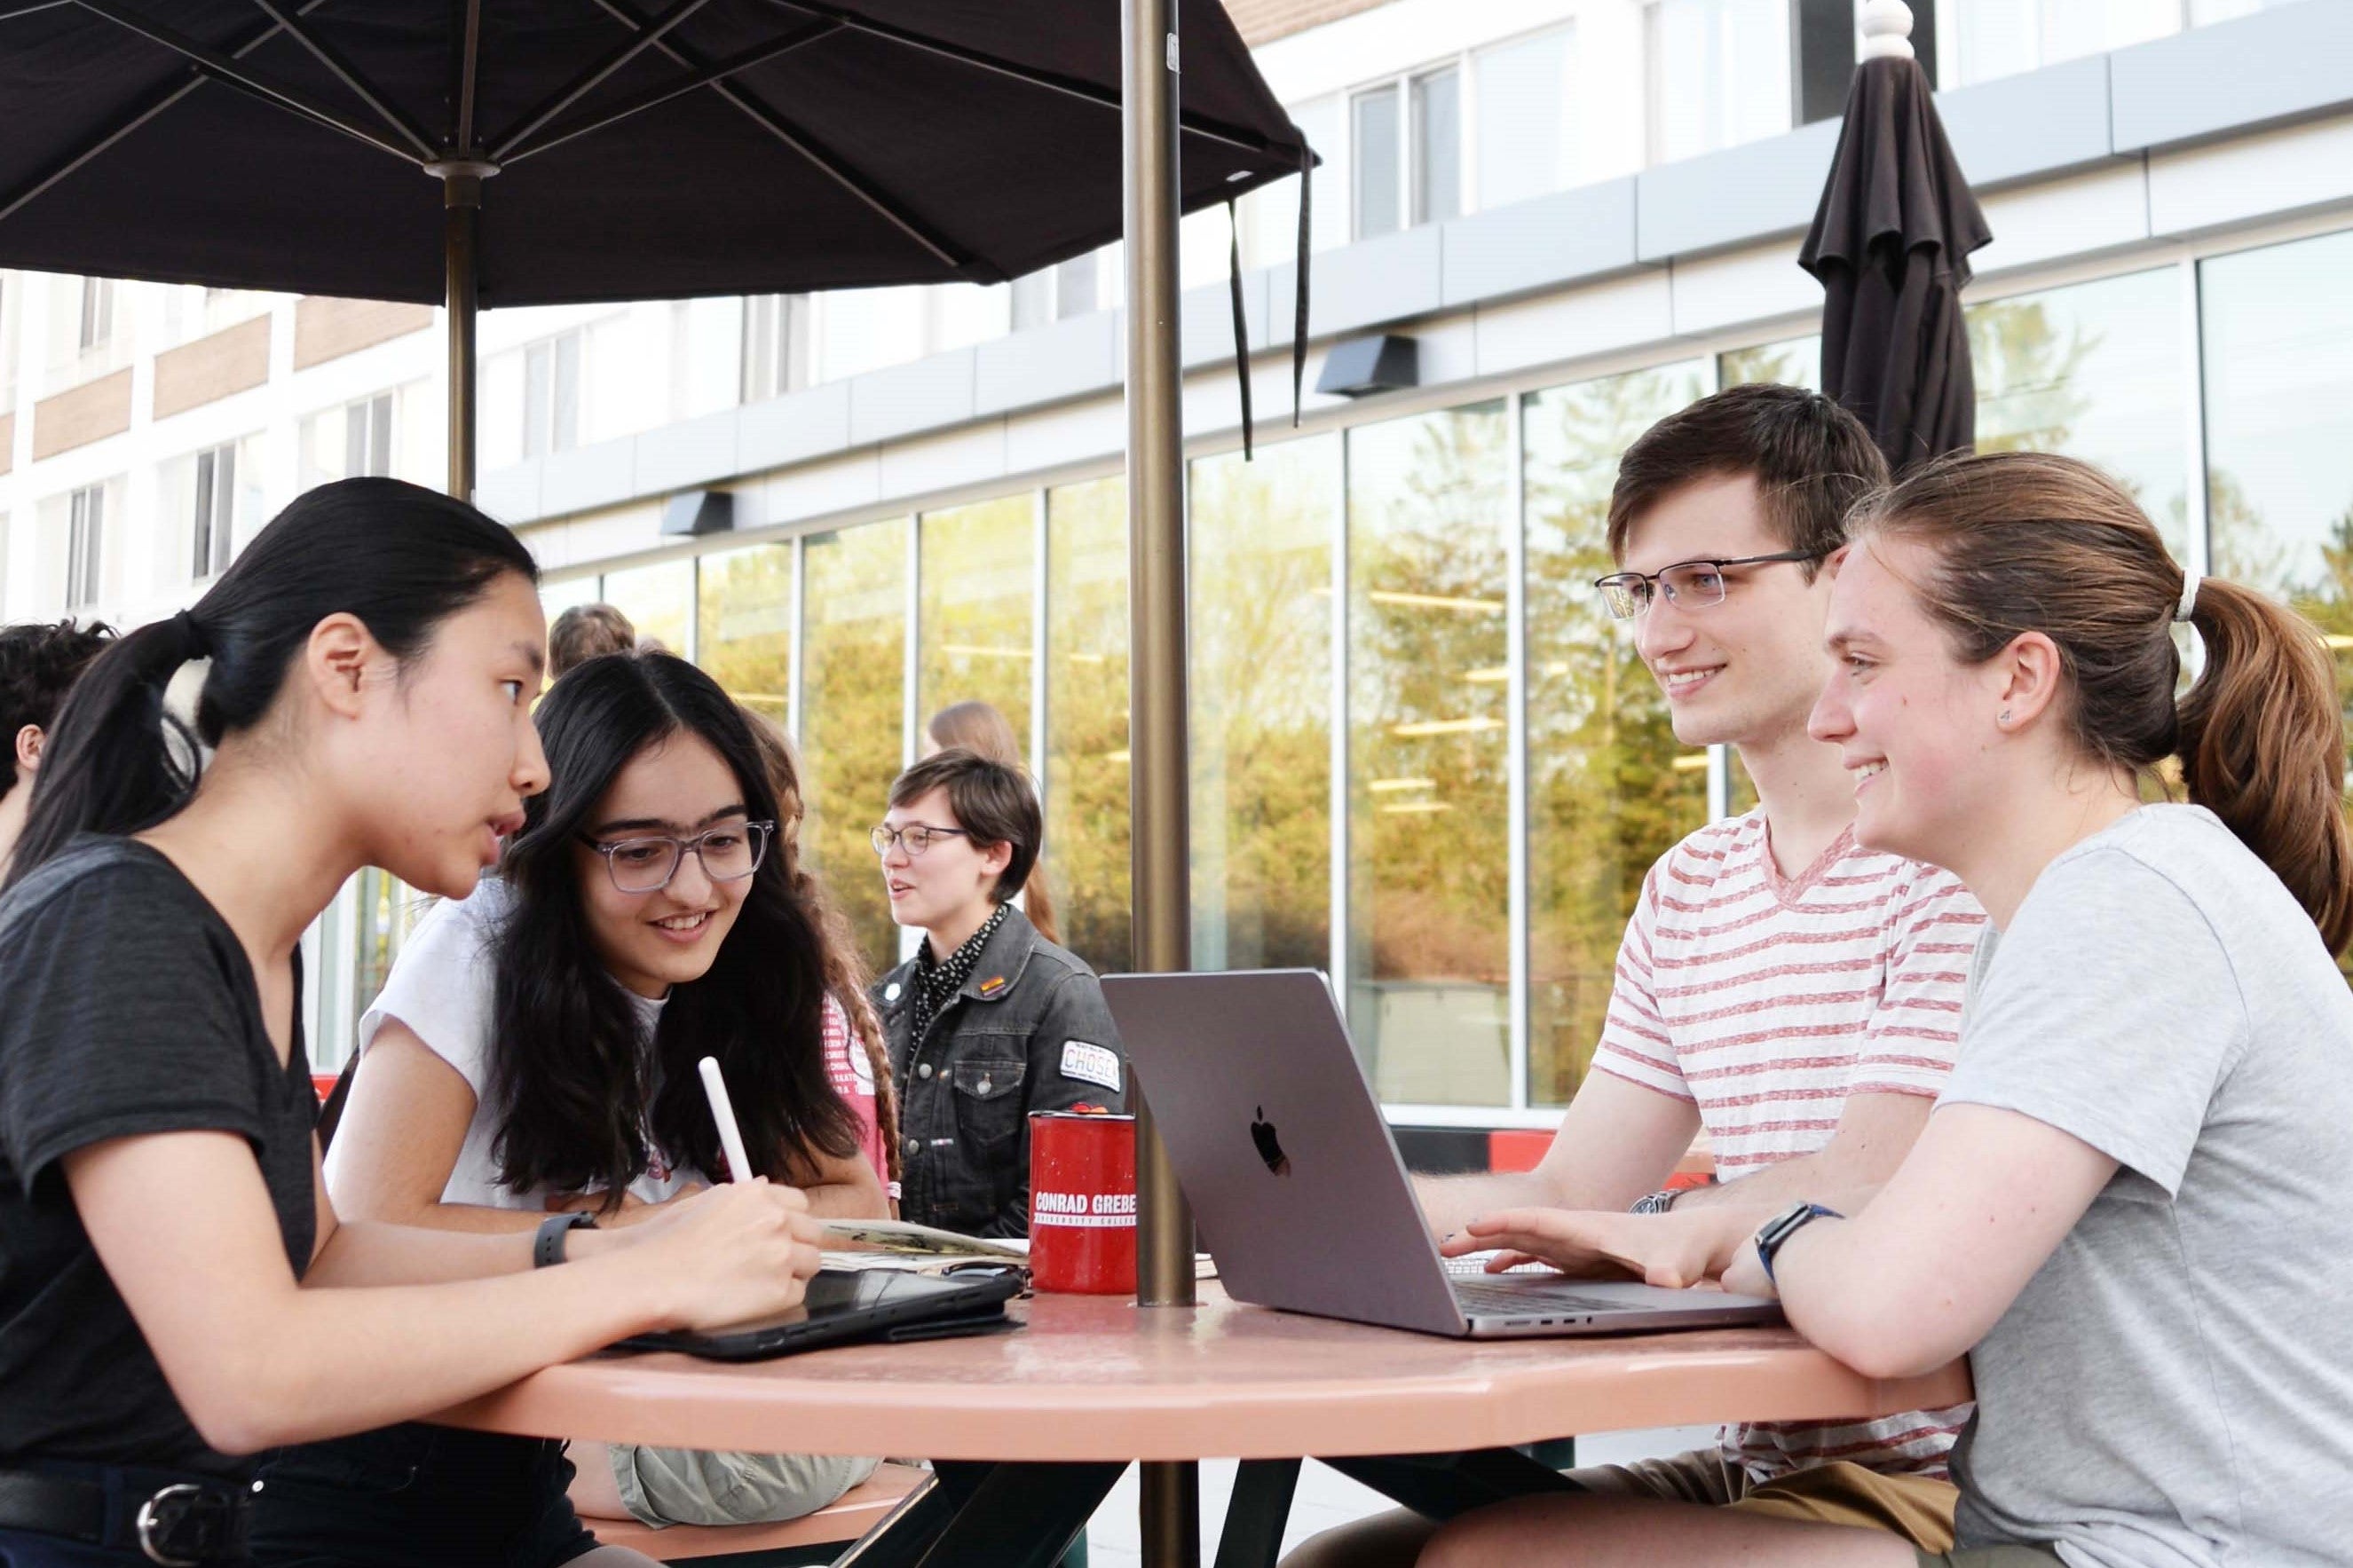 Students talking over open books and laptops at a table on the Grebel patio